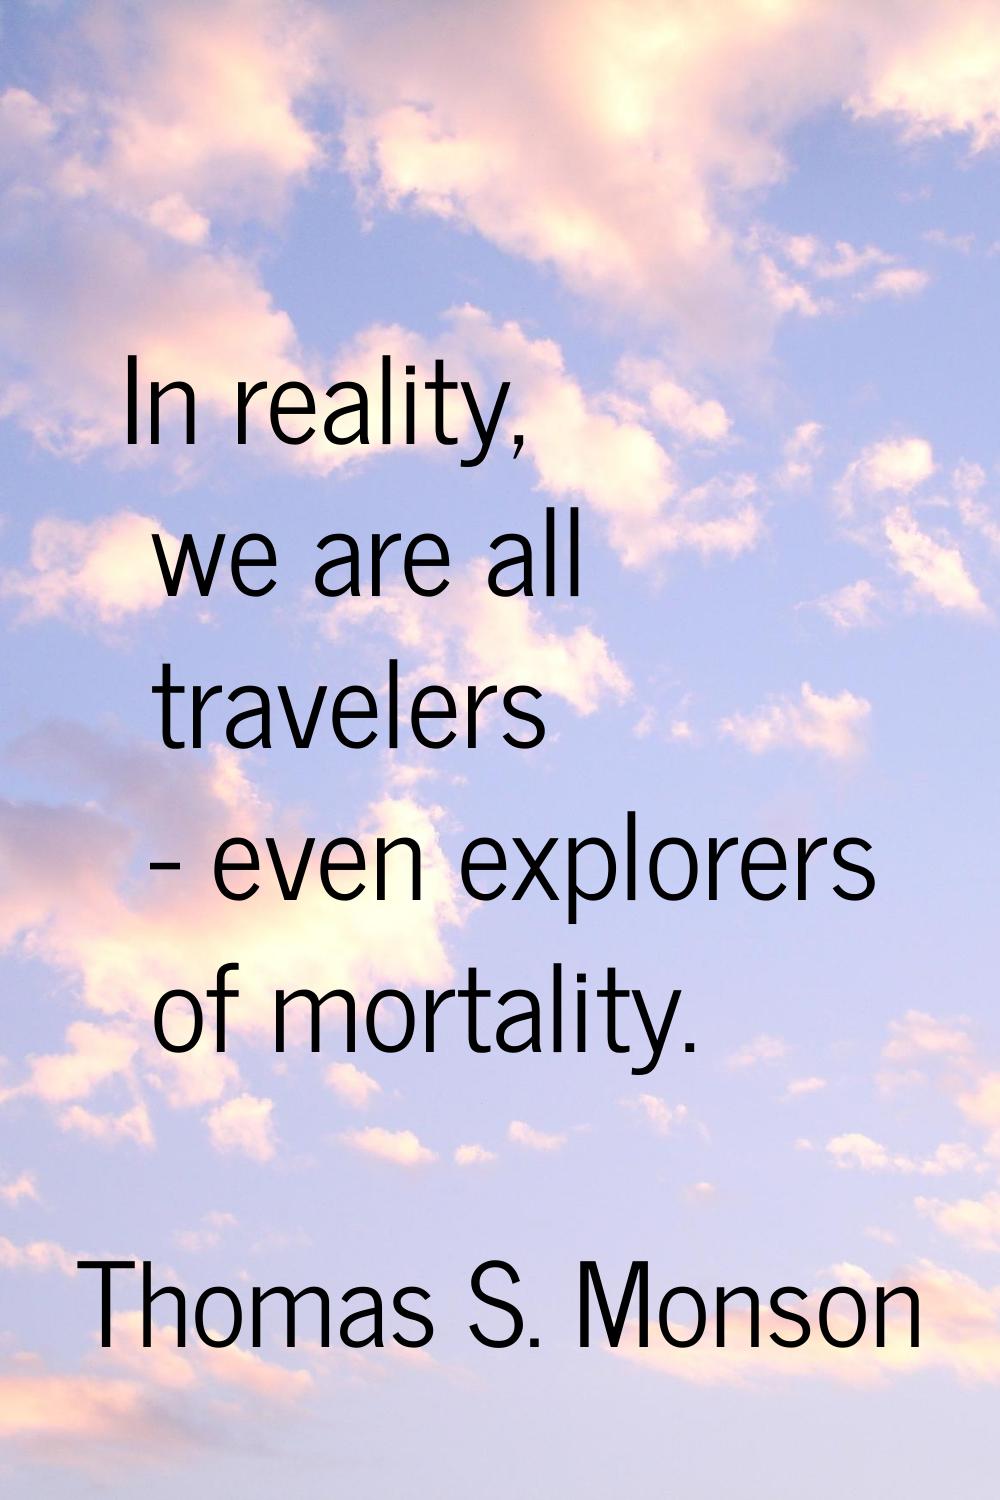 In reality, we are all travelers - even explorers of mortality.